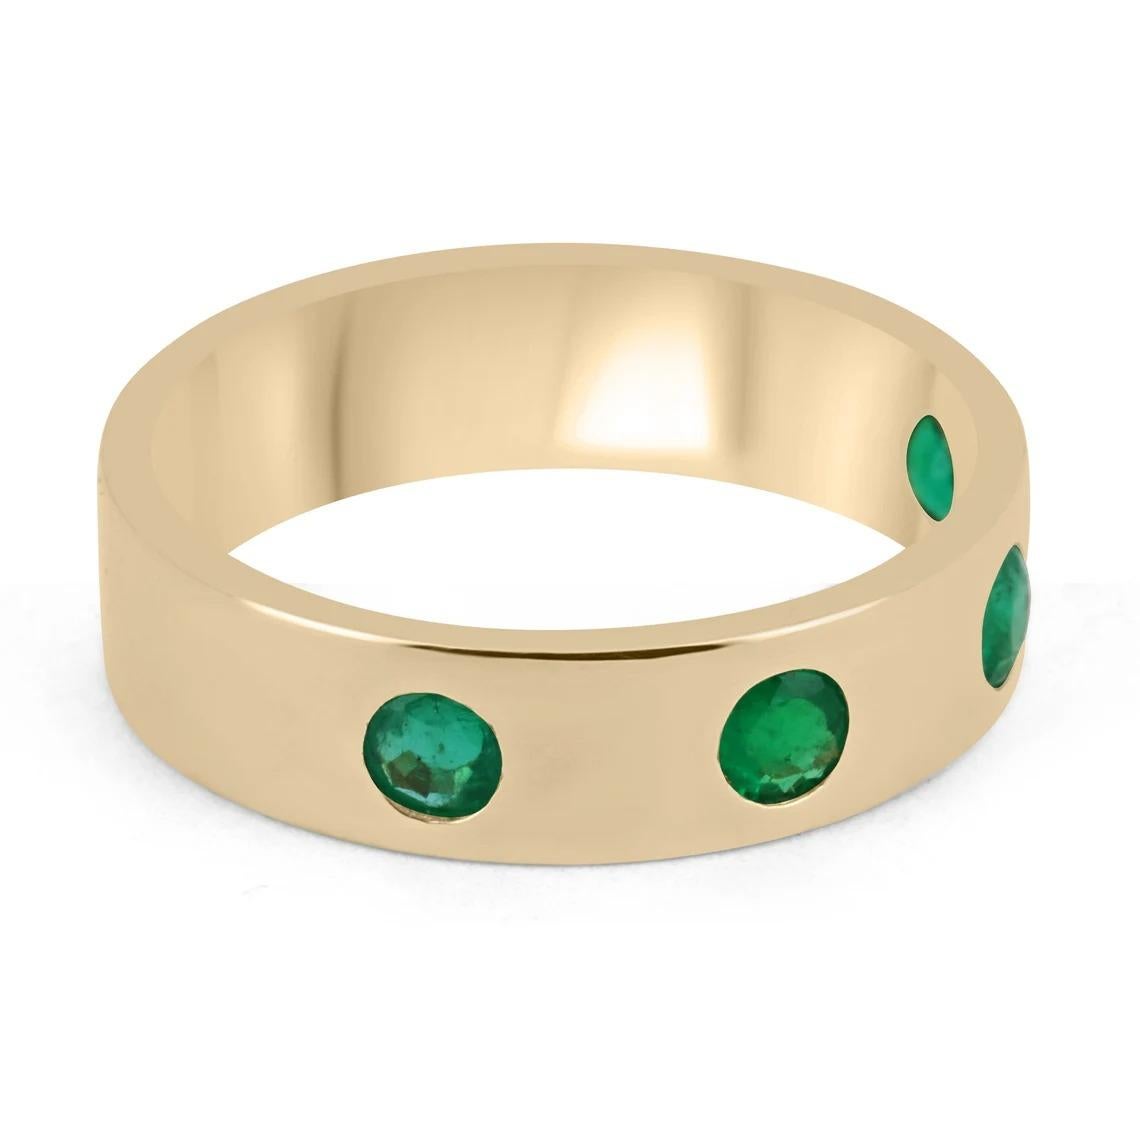 A stunning natural Colombian emerald hand-made solid gold 18K band ring. This gorgeous piece features multiple, round cut, Colombian emeralds, going all around the band. The high-quality natural gemstones are ethically mined in the prominent mines